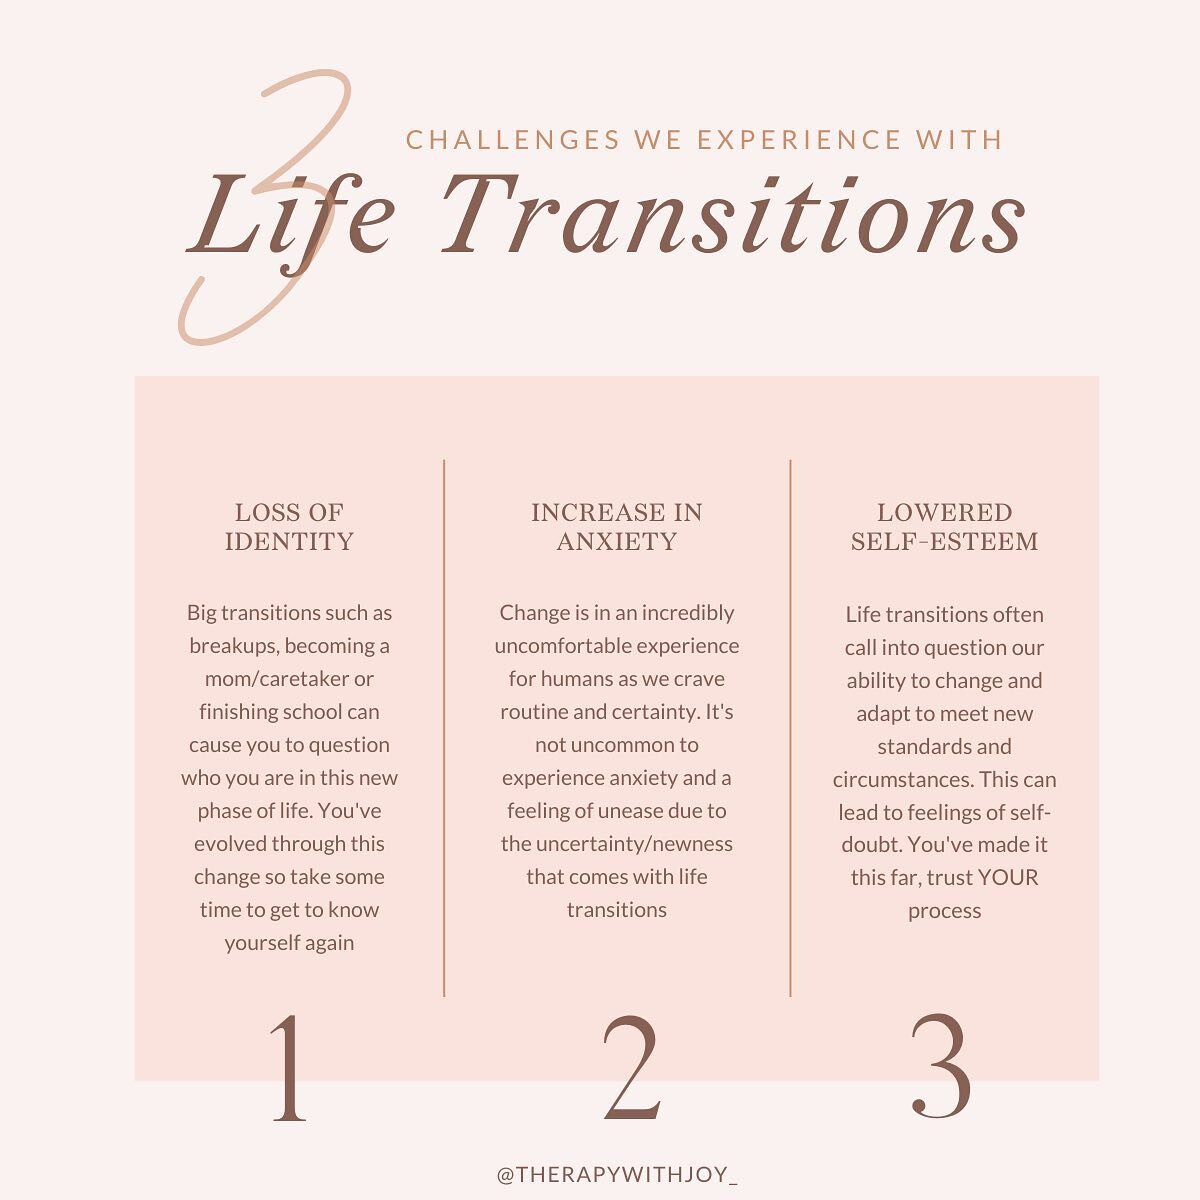 Life transitions are tough. Here are 3 reasons why they can feel so challenging.